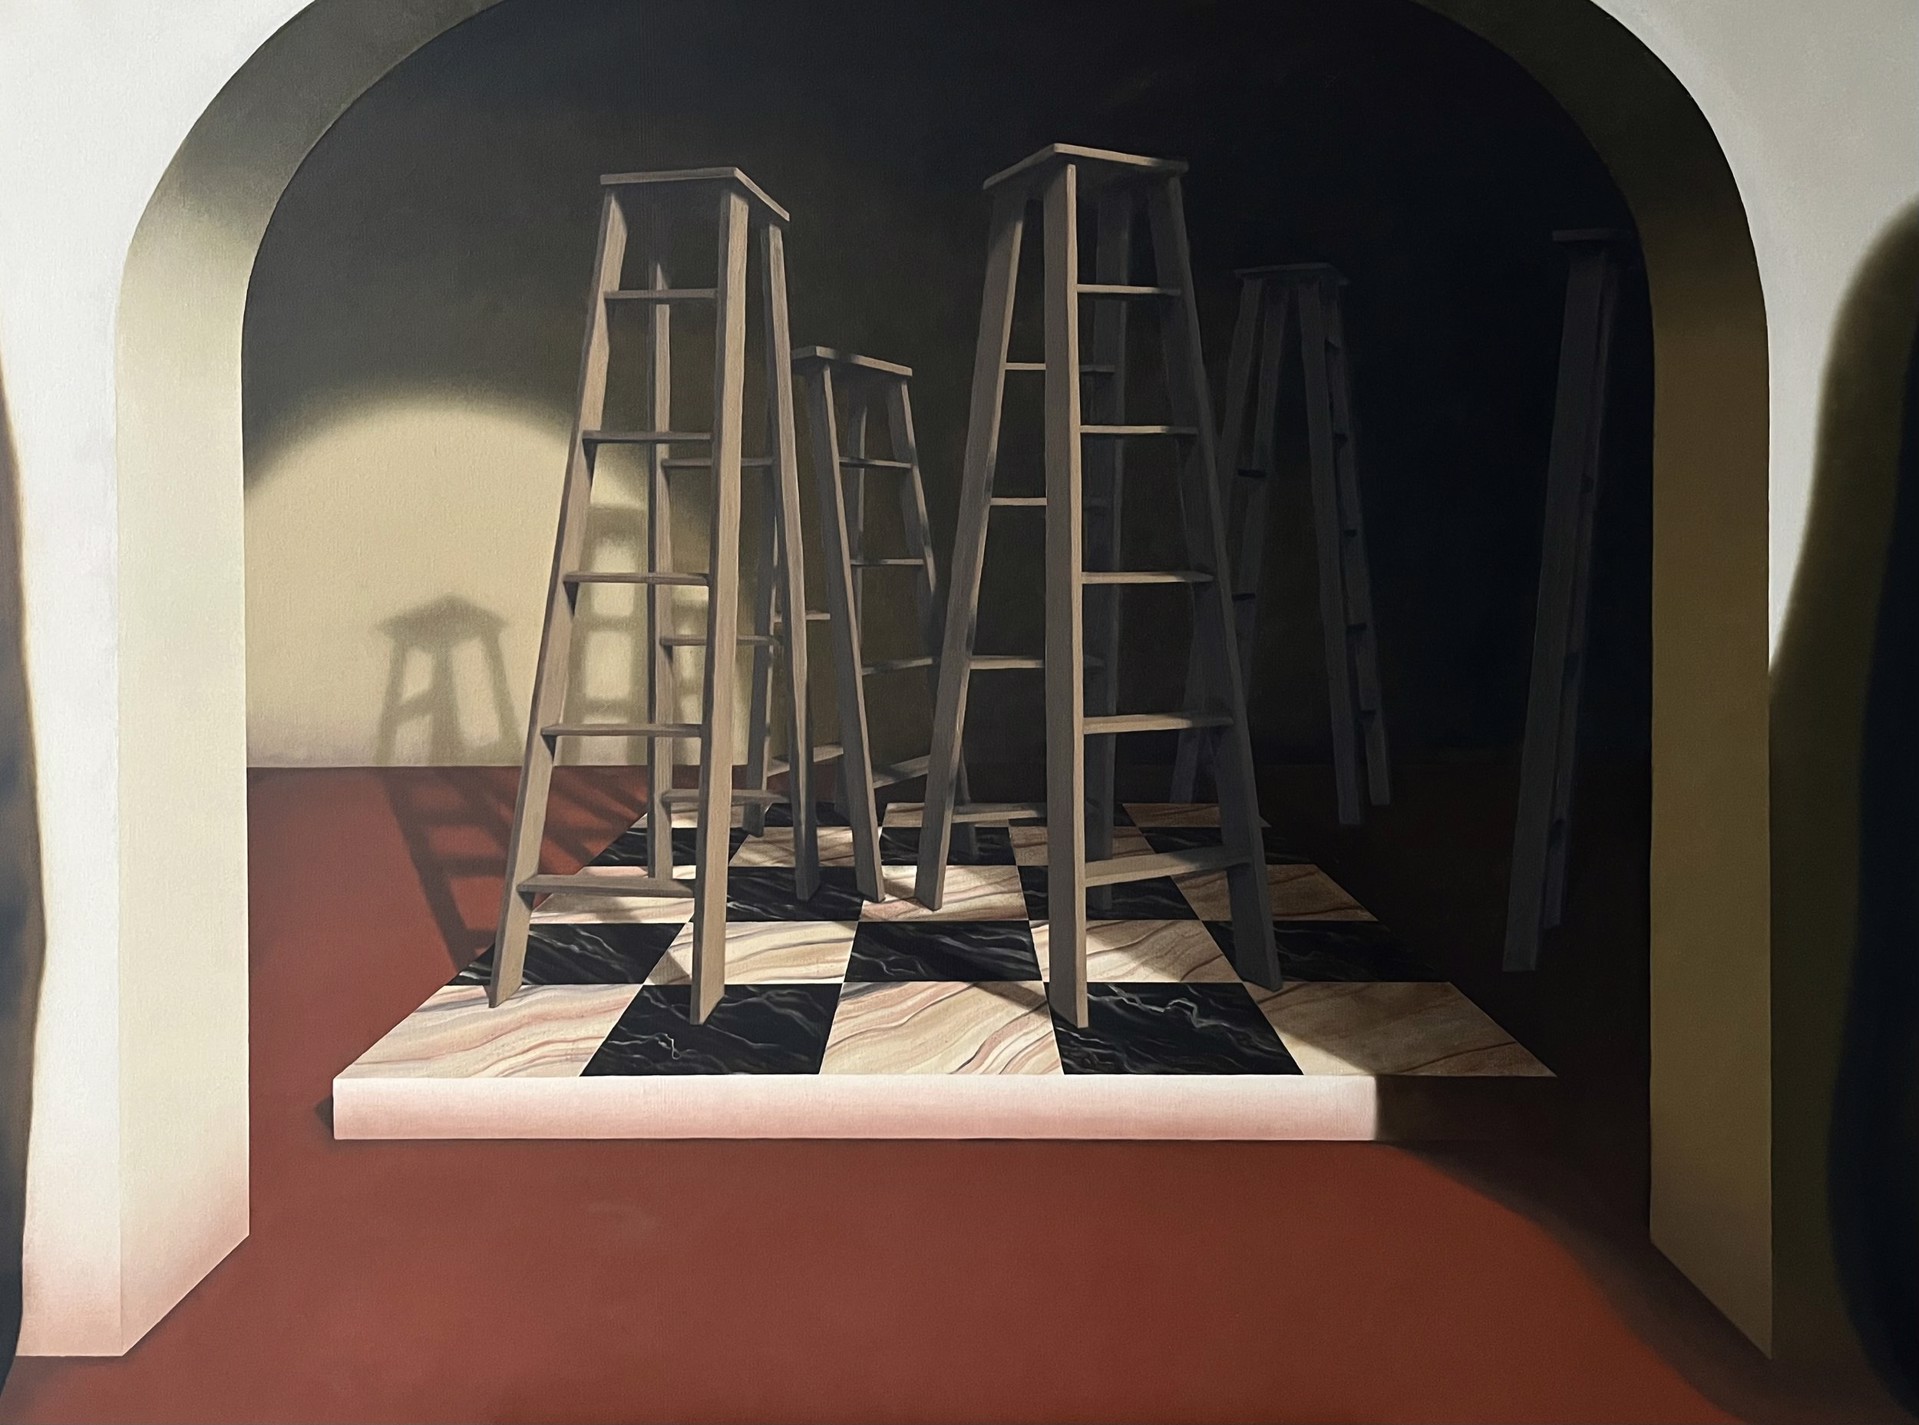 Ladders in Meeting Place by Adam Stoner